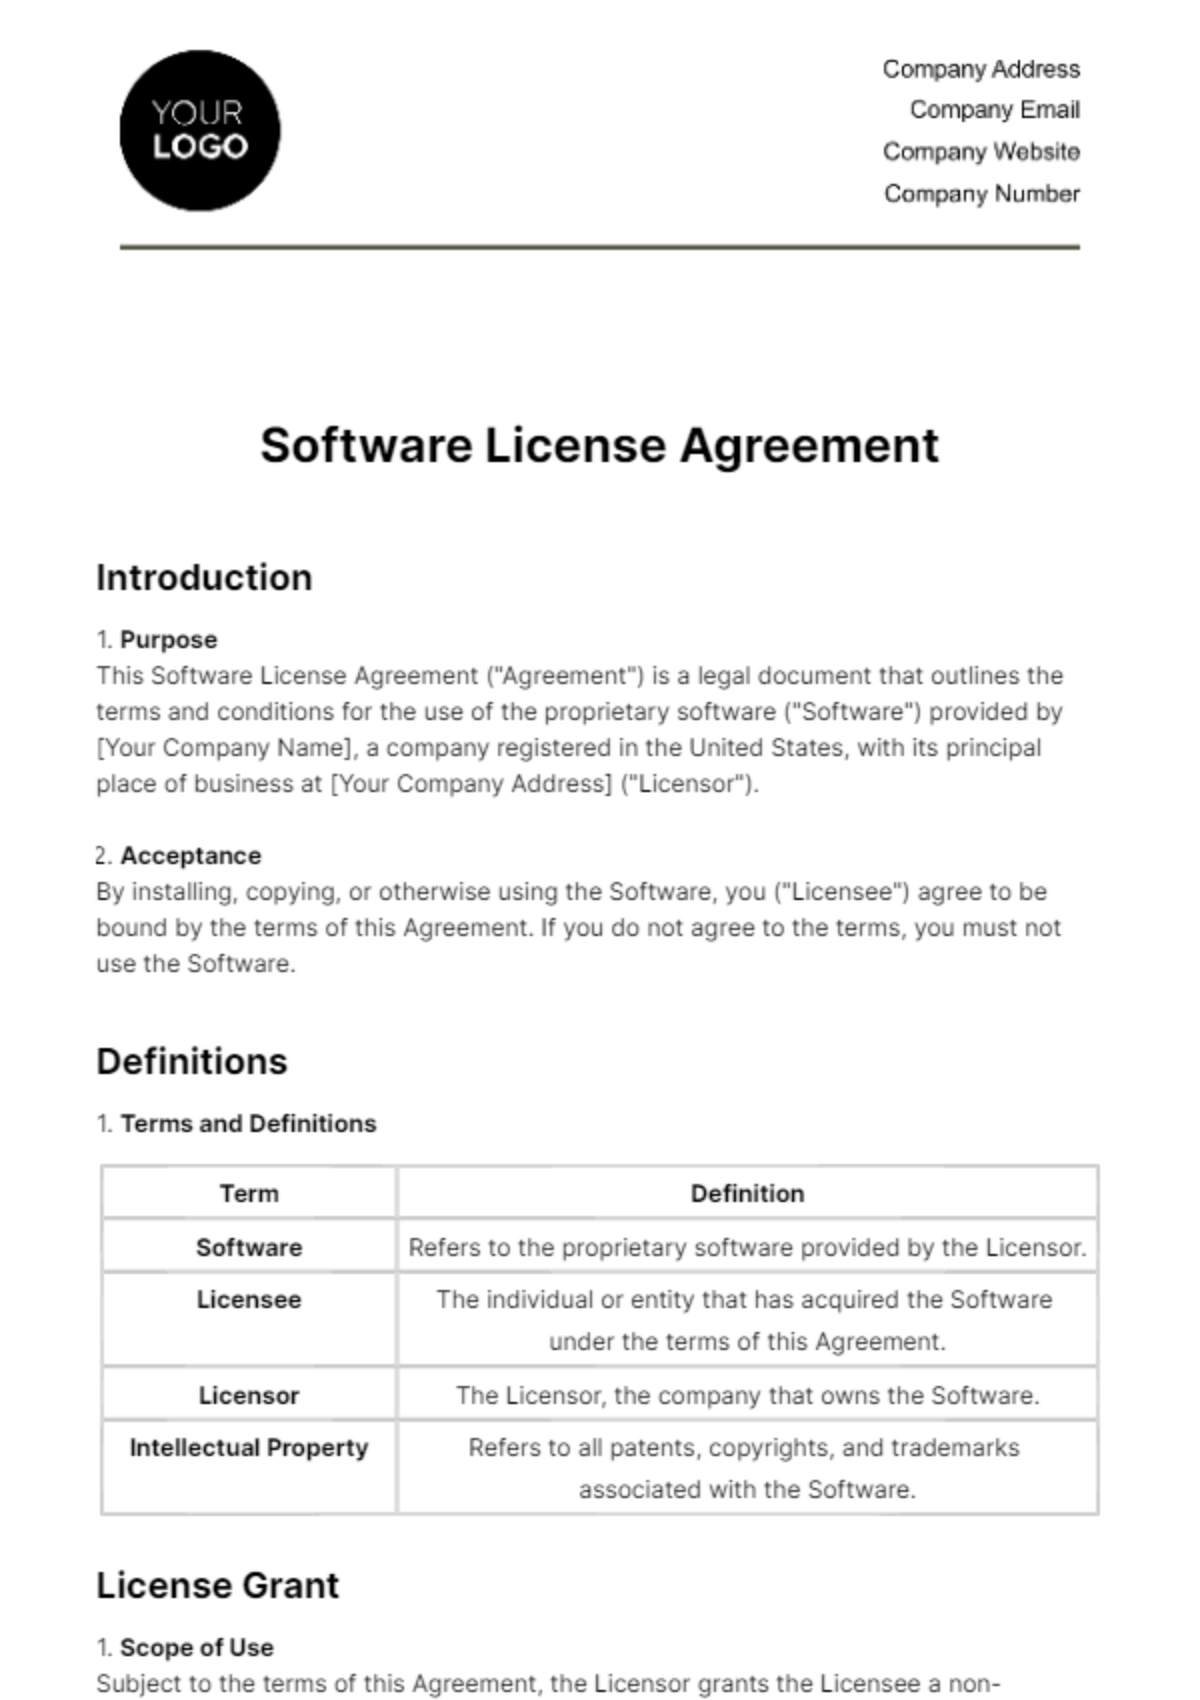 Free Software License Agreement HR Template